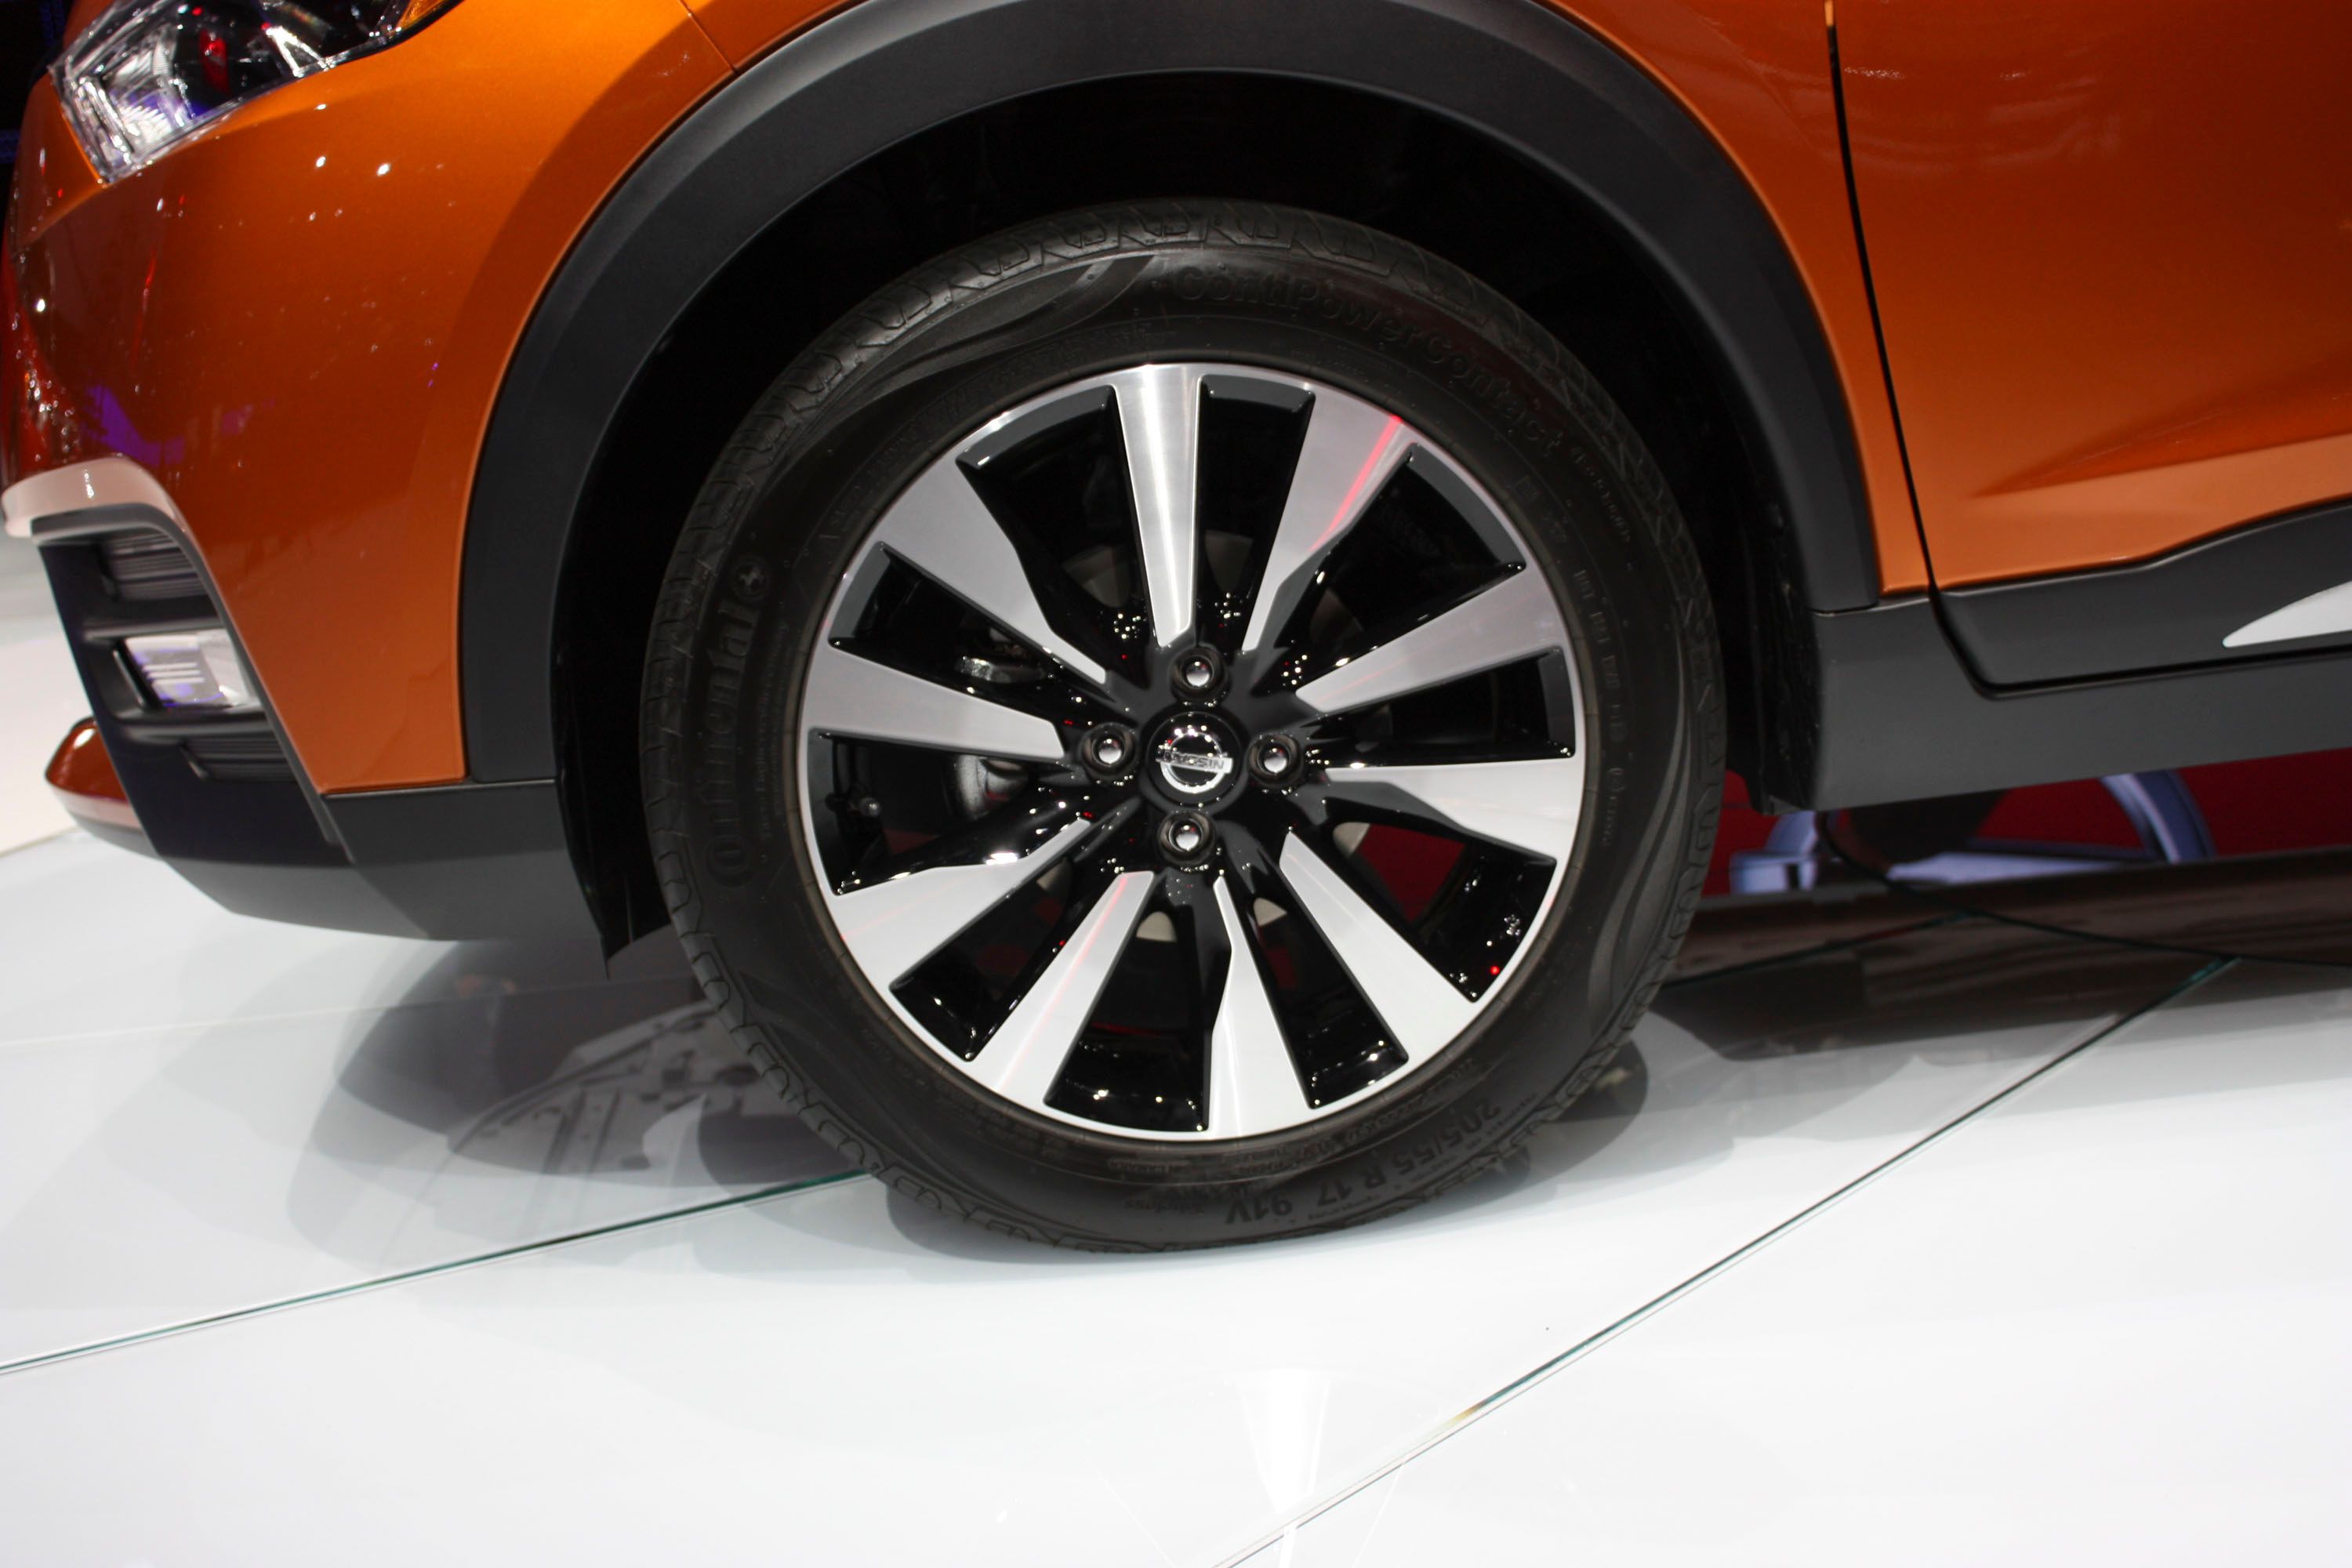 Available 17-inch wheels higher in trim line